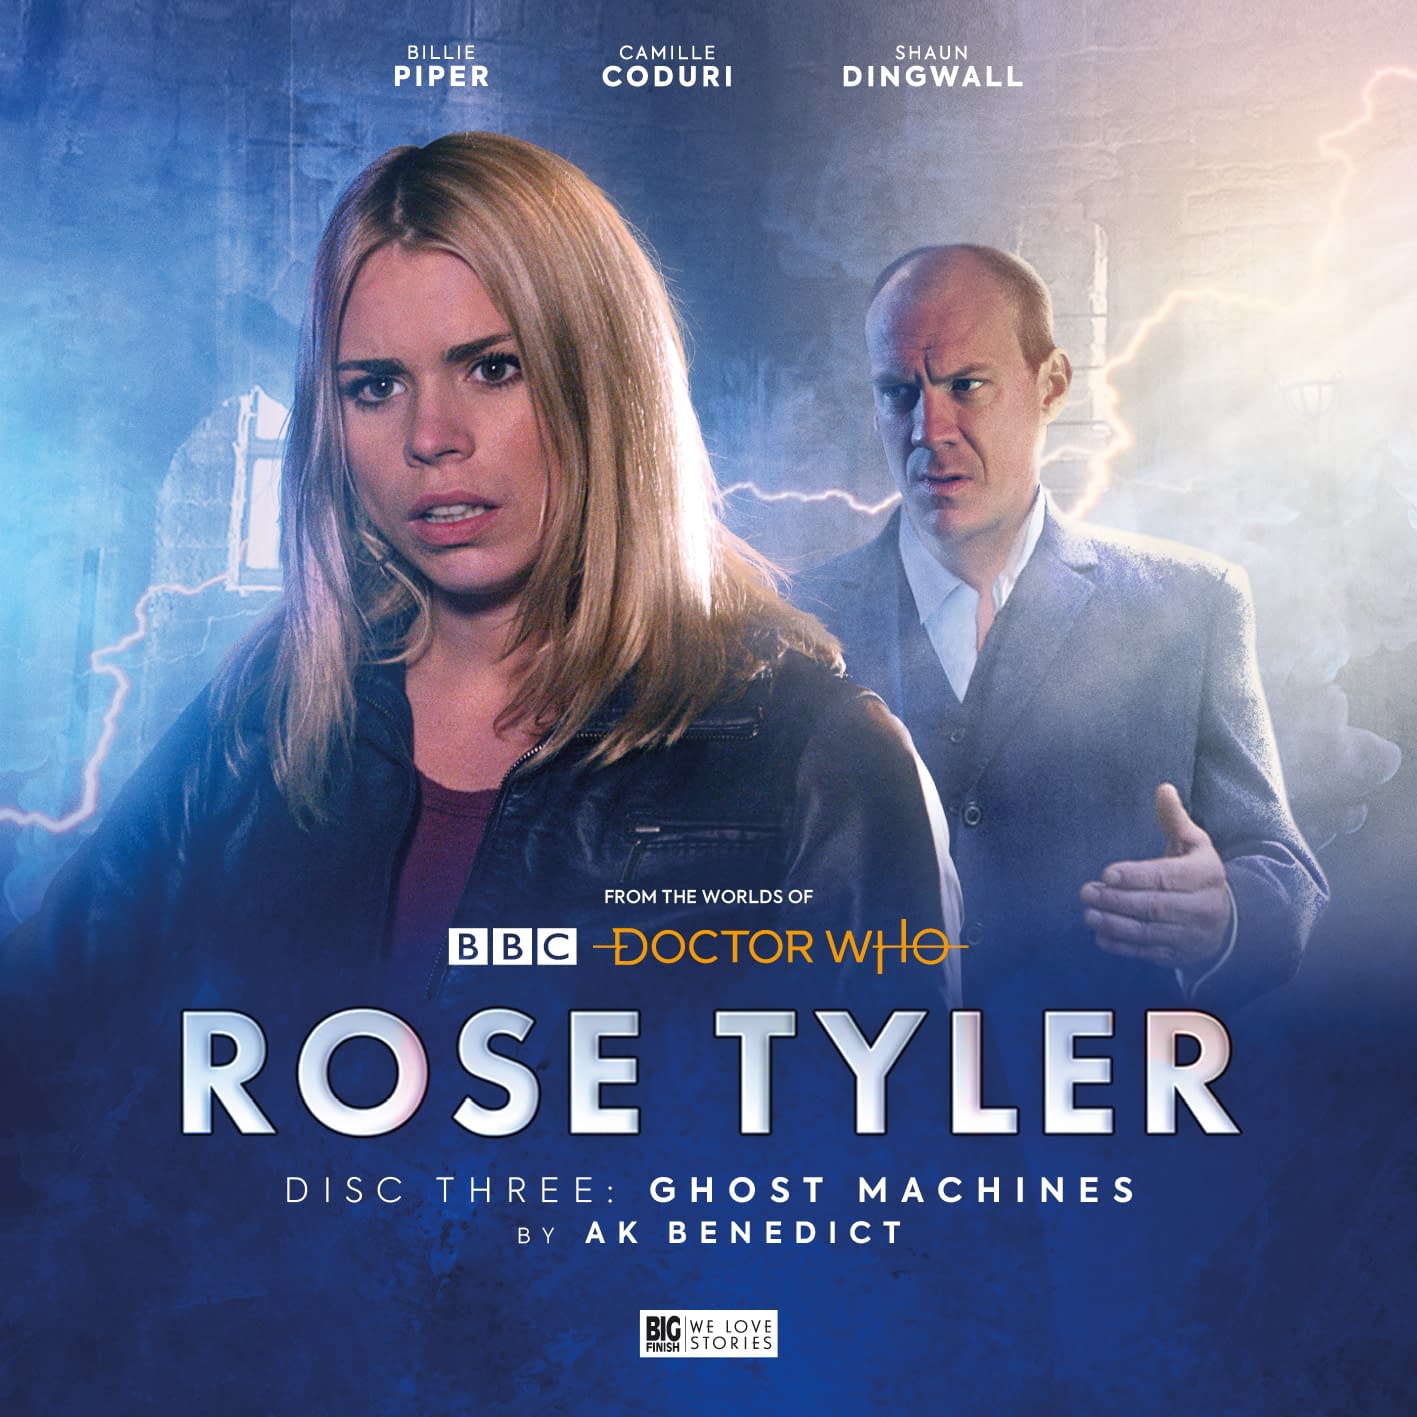 "Doctor Who": Billie Piper Returns in Big Finish Audio Drama "Rose Tyler: The Dimension Cannon"